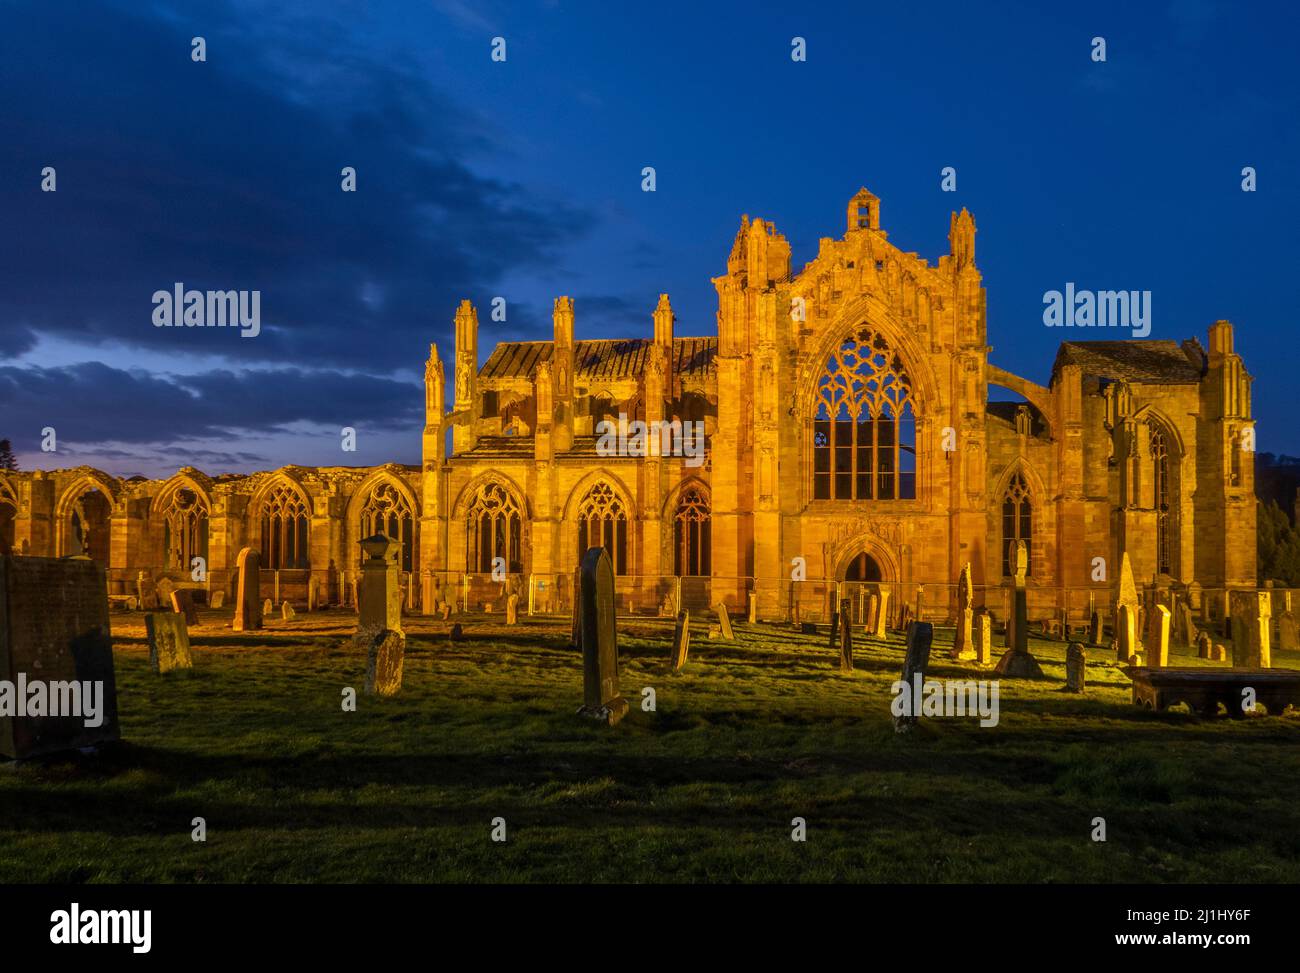 Scottish Borders, UK. 25th Mar, 2022. 25th March 2022 Scotland weather,  An evening view of the illuminated Melrose Abbey in the Scottish Borders.  David I founded Melrose Abbey, the first Cistercian monastery in Scotland, in 1136. It was one of a number of abbeys that he set up in the Borders to show both his piety and his power over this contested territory. Credit: phil wilkinson/Alamy Live News Stock Photo